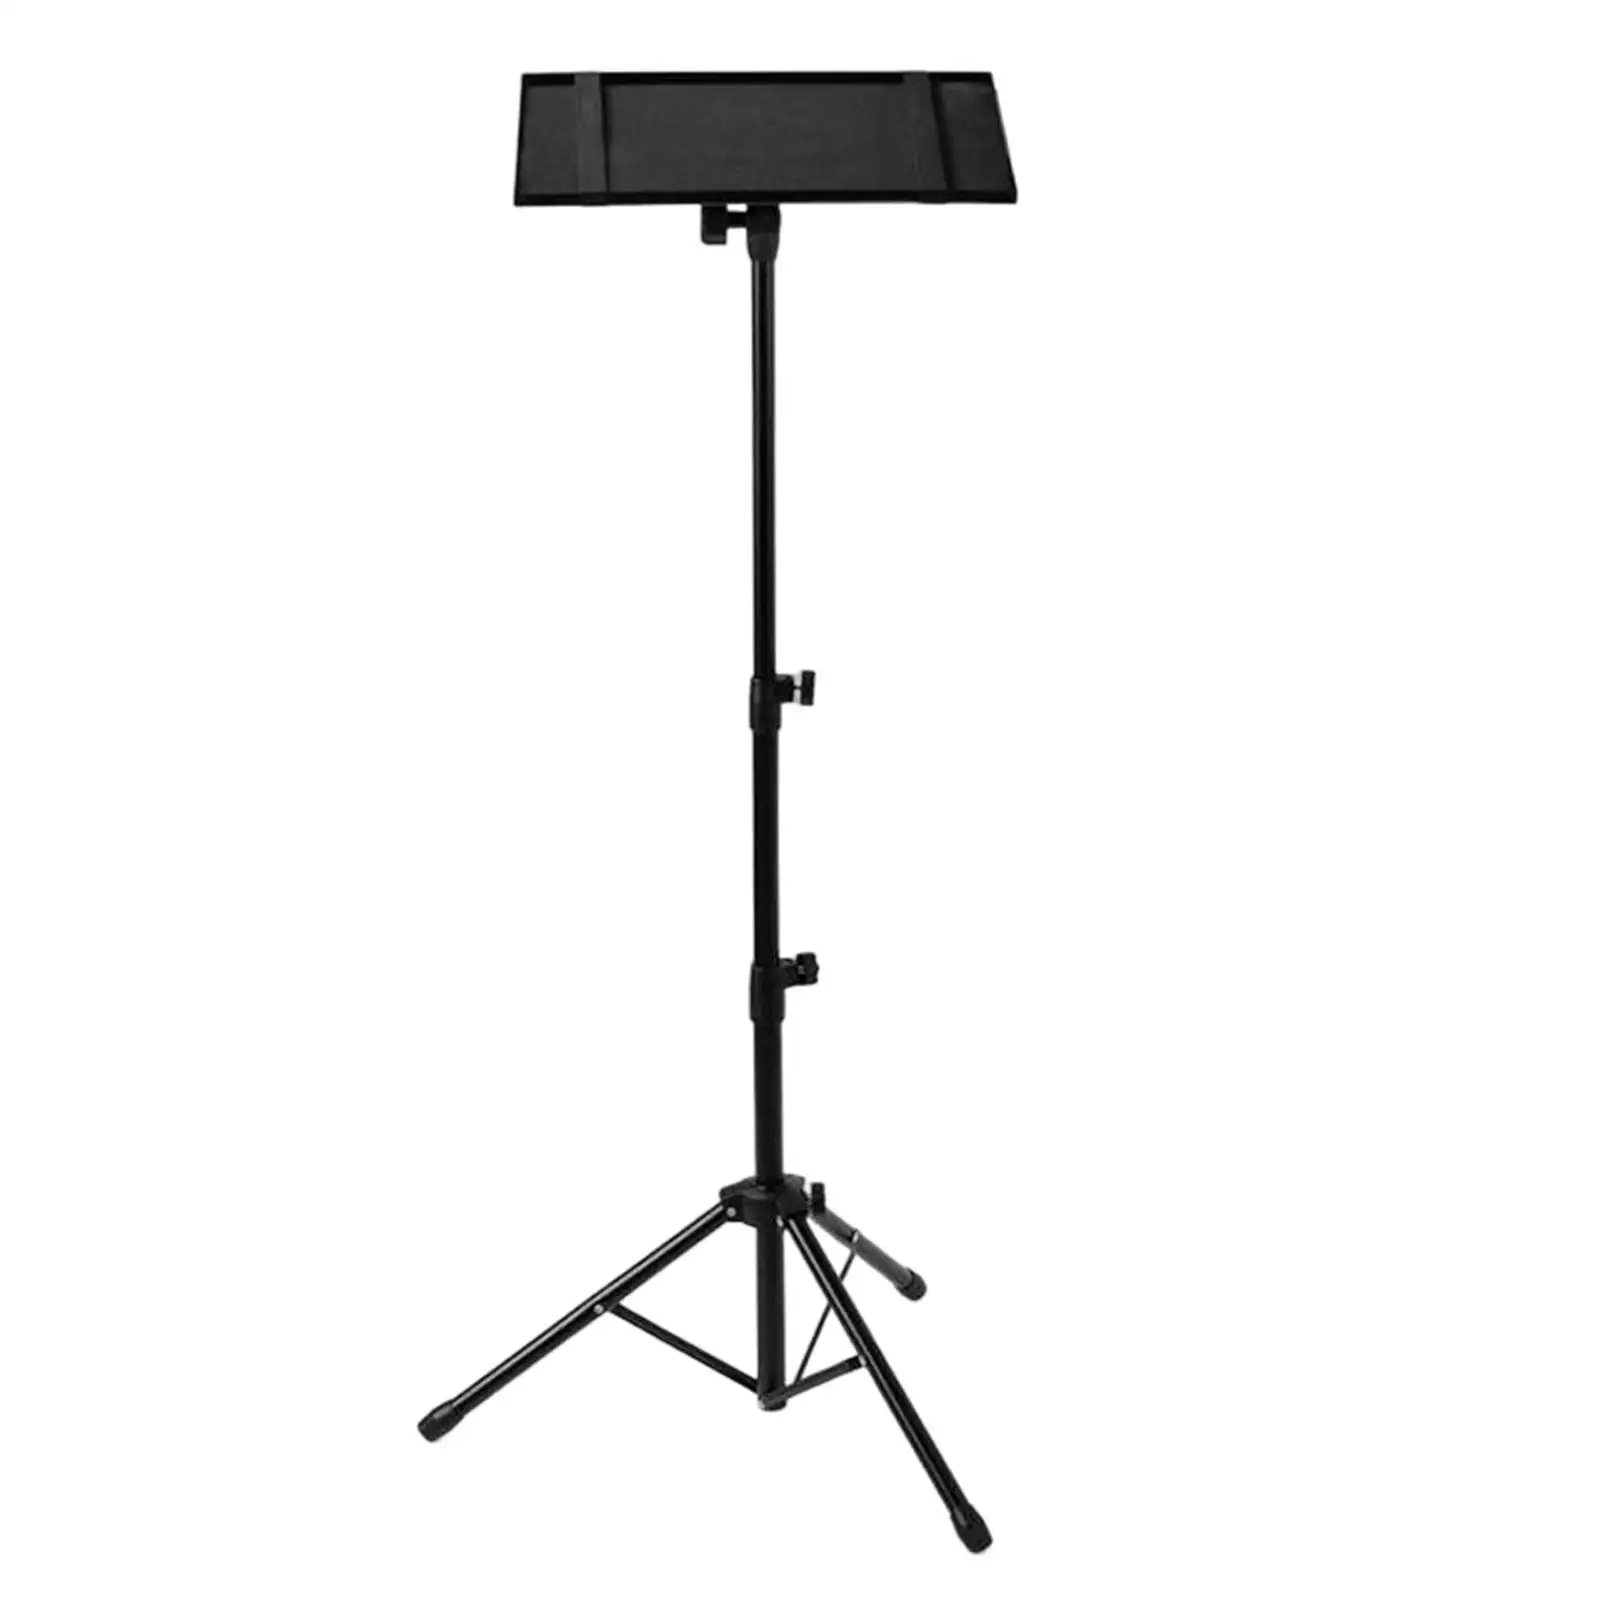 Universal Projector Tripod Stand Foldable Durable Detachable for Home Studio